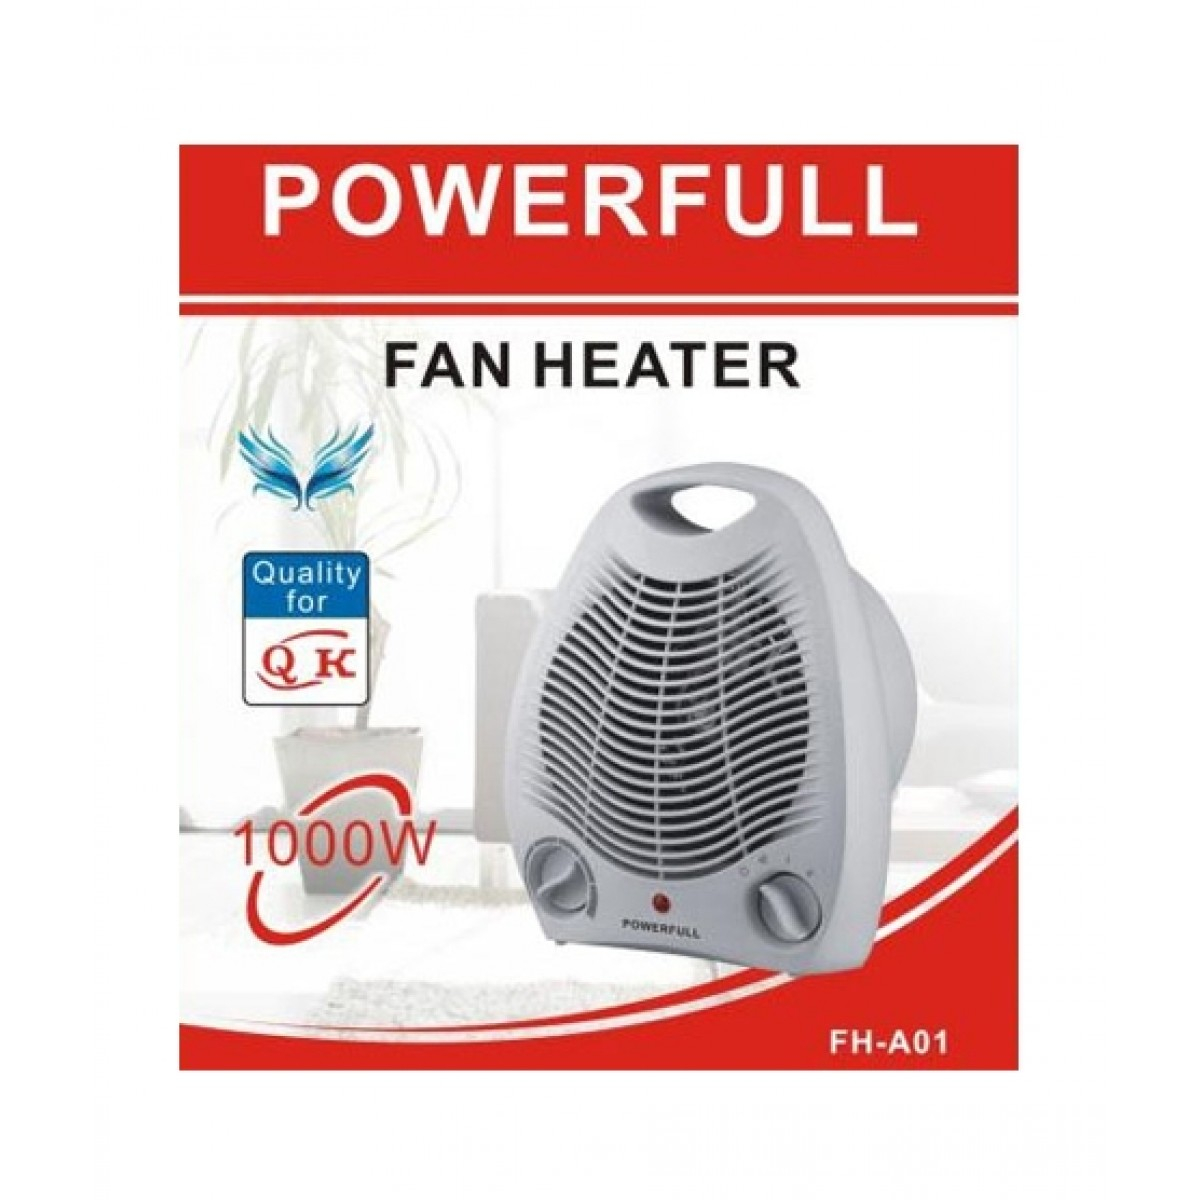 Compare Heaters Prices In Pakistan Cartrightpk for measurements 1200 X 1200